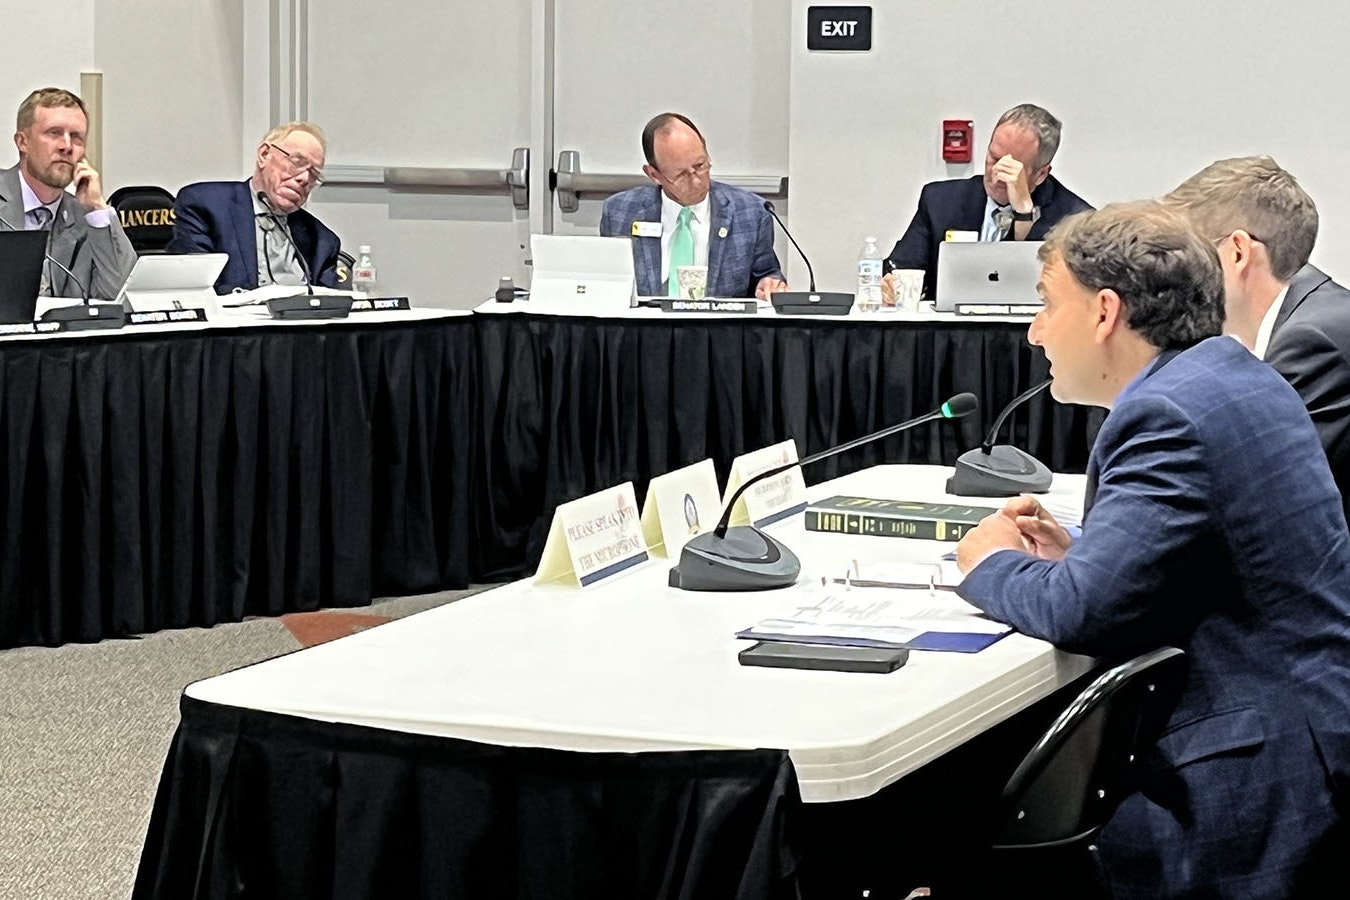 Wyoming Secretary of State Chuck Gray talks with the Corporations, Elections and Political Subdivisions Committee on Thursday about a 30-day residency requirement to vote in Wyoming.